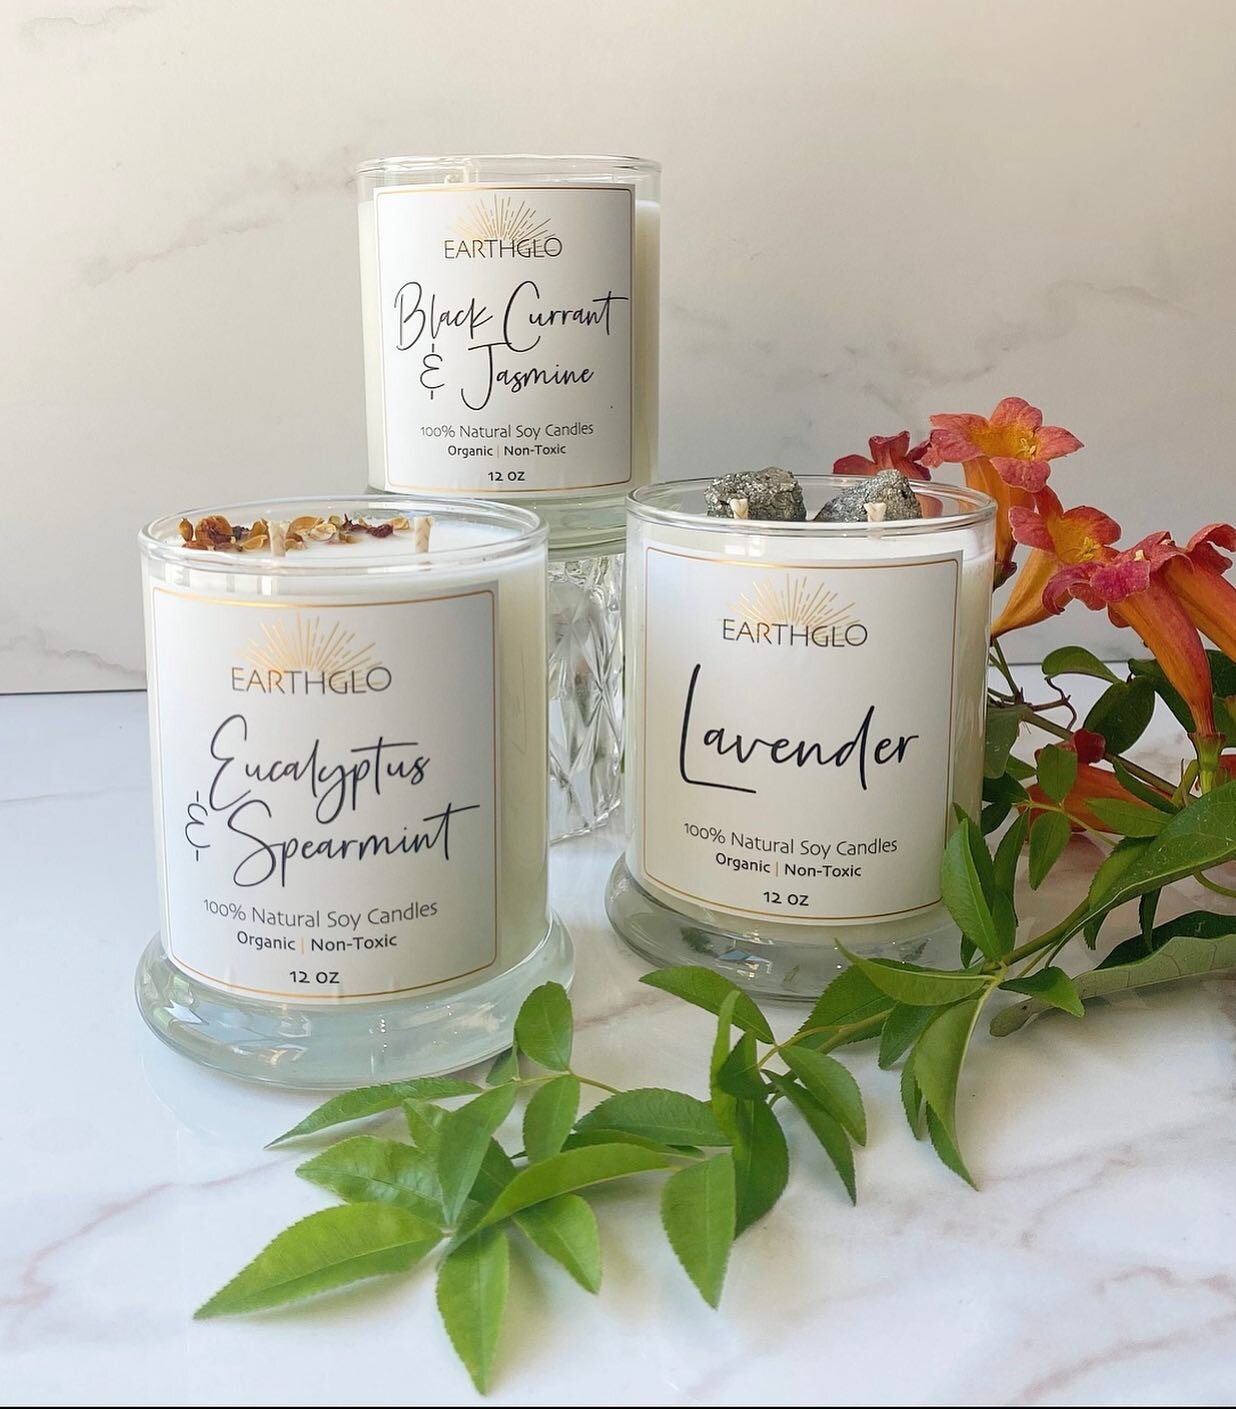 You can never have too many candles! 😍
&bull;
&bull;
&bull;
&bull;
&bull;
&bull;
#earthglo #candles #nontoxic #organic #vegan #handmade #love #shoplocal #shoplocallasvegas #summerlin #vegas #floral #botanicals #soywax #womenowned #happy